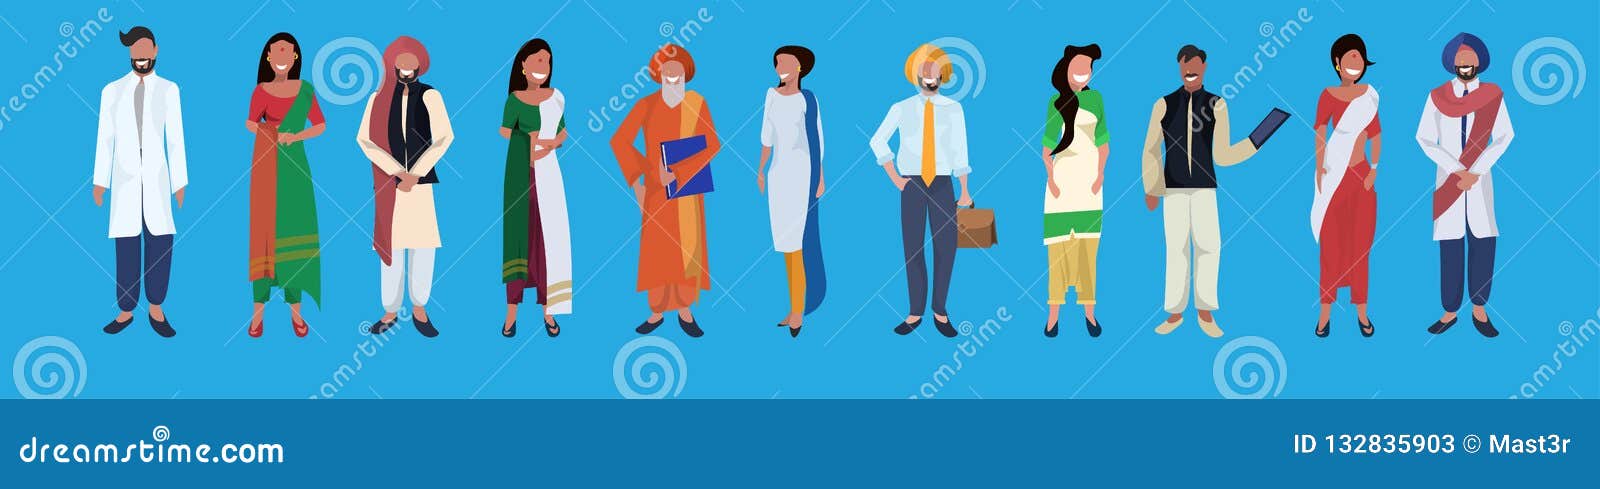 Indian Woman Man Standing Together National Traditional Clothes Male Female  People Group Cartoon Character Collection Stock Vector - Illustration of  collection, indian: 132835903